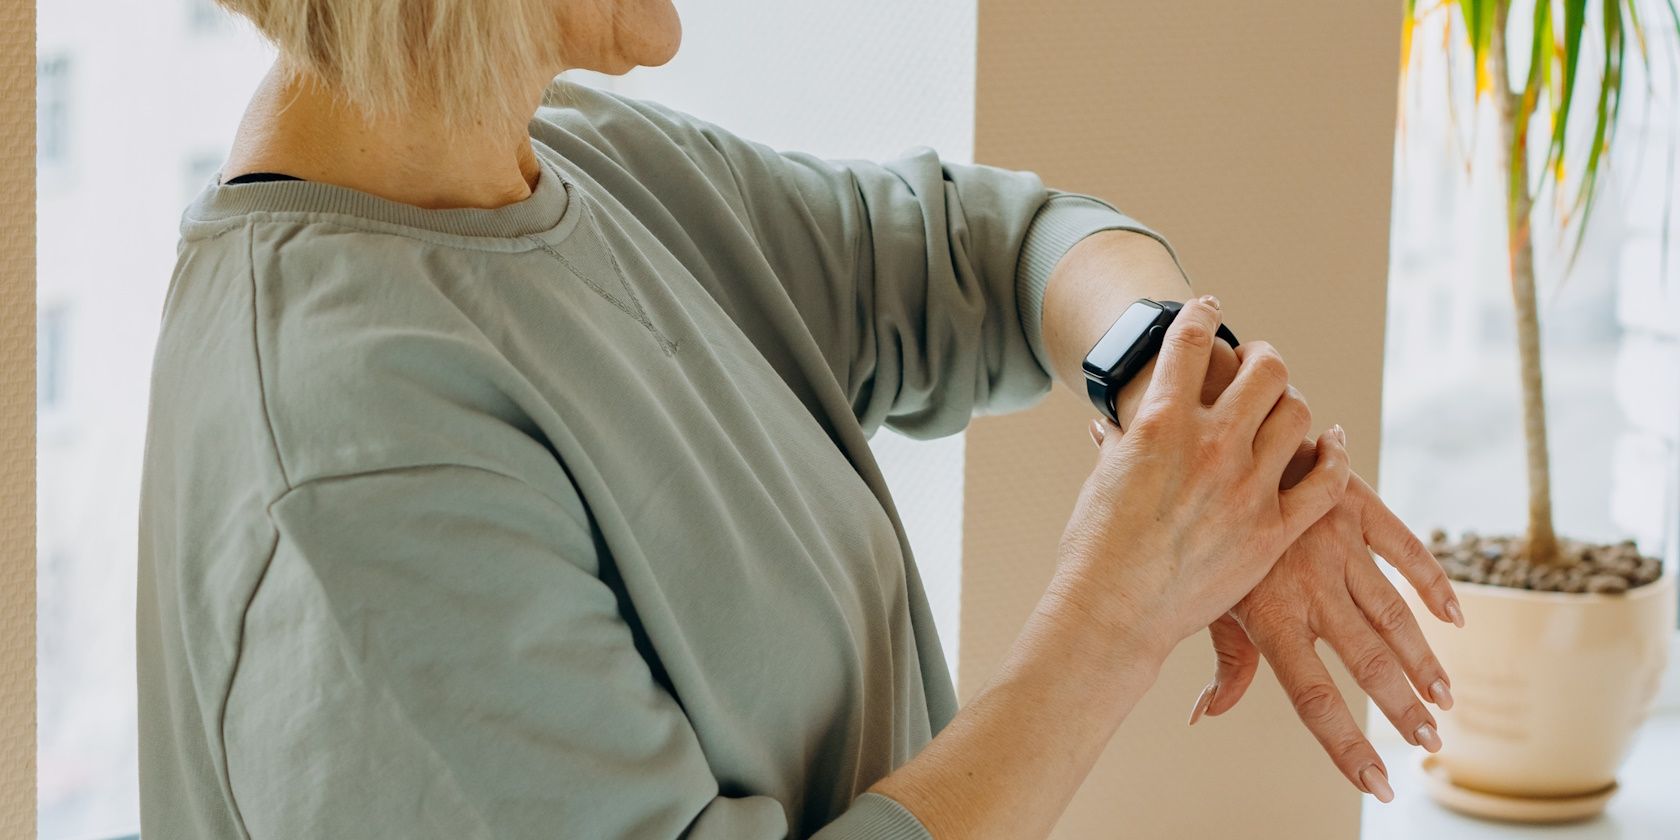 9 Wearable Devices for Seniors to Improve Health and Safety